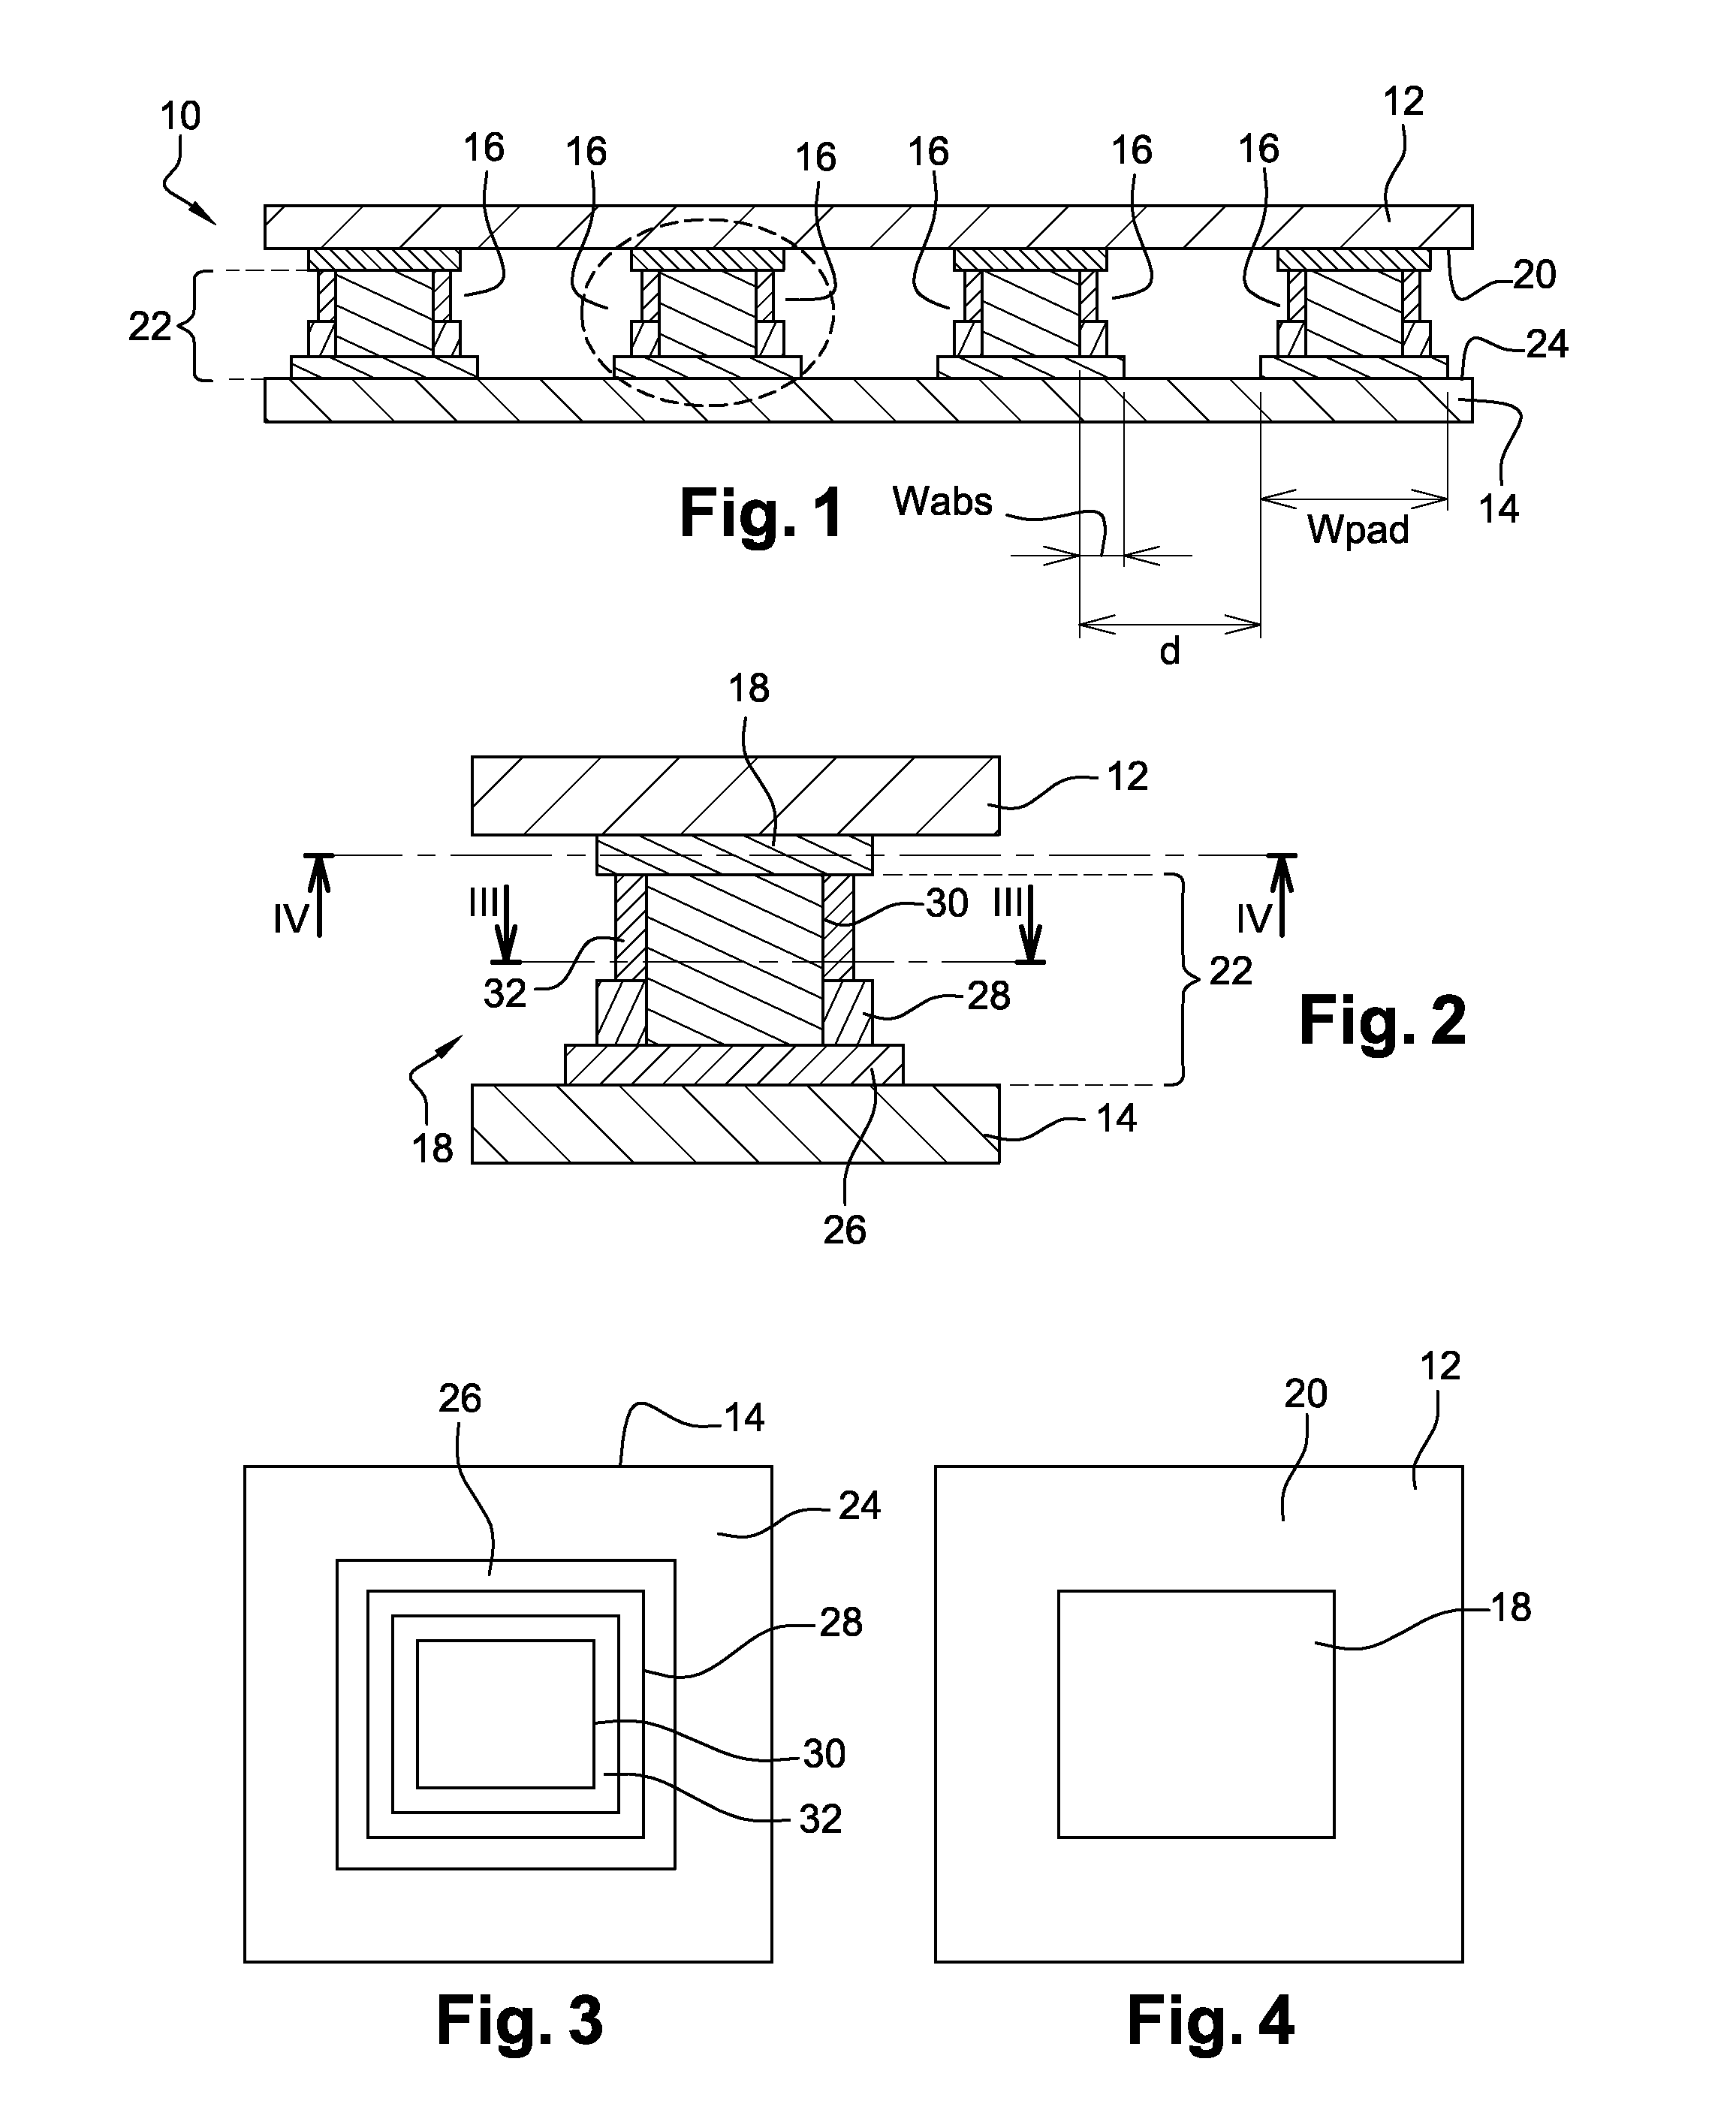 Flip-Chip Hybridisation Of Two Microelectronic Components Using A UV Anneal